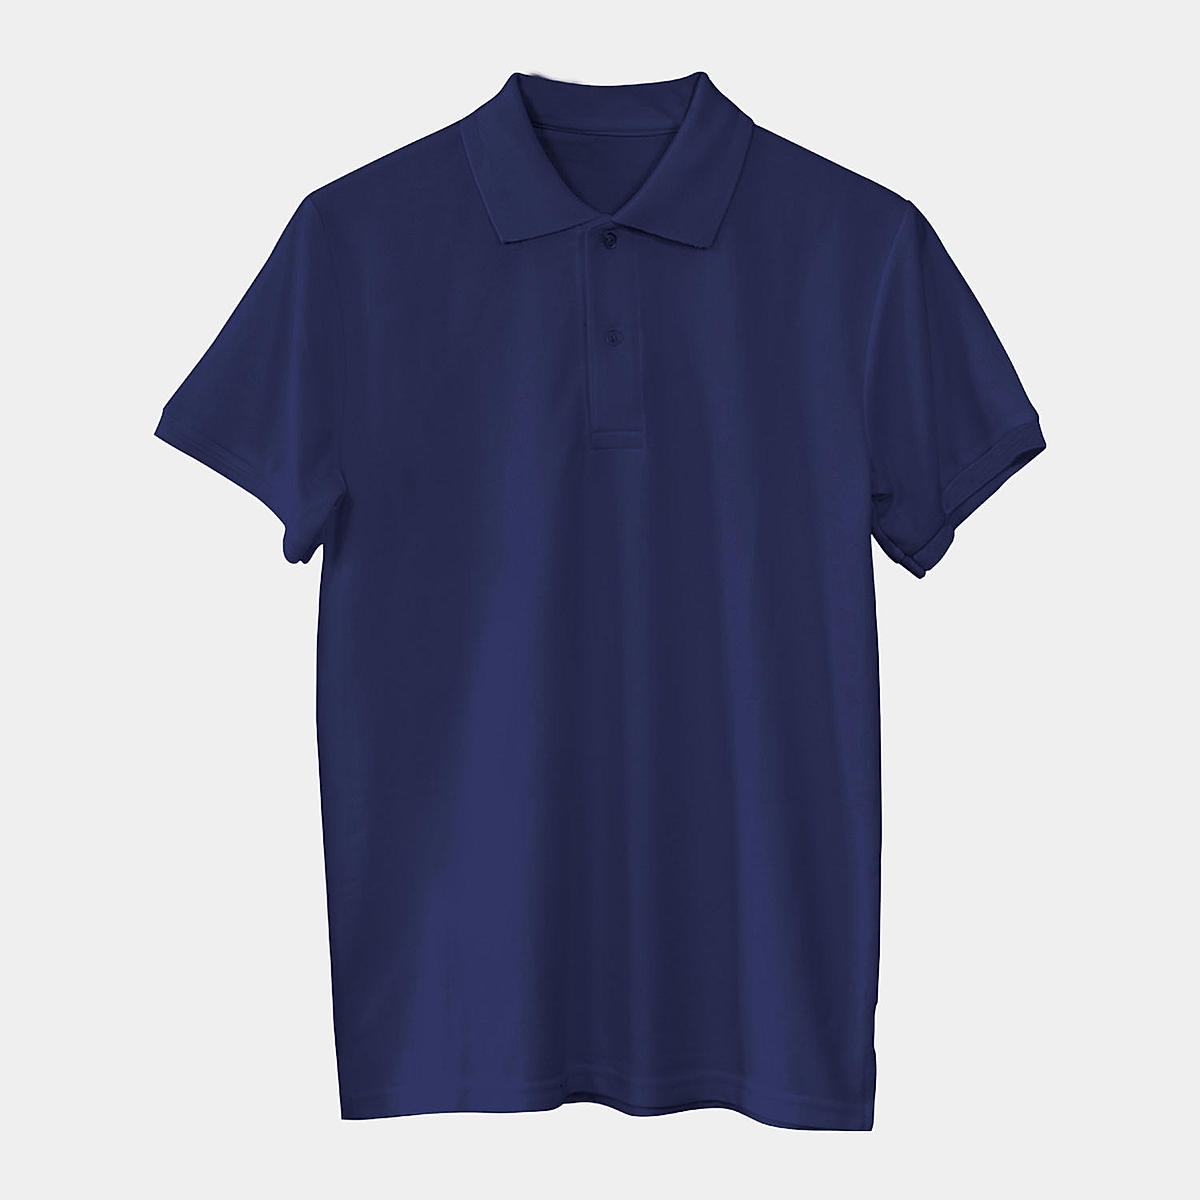 Buy Navy Blue Premium Polo T-shirt Online at Best Price | Alma Mater Store